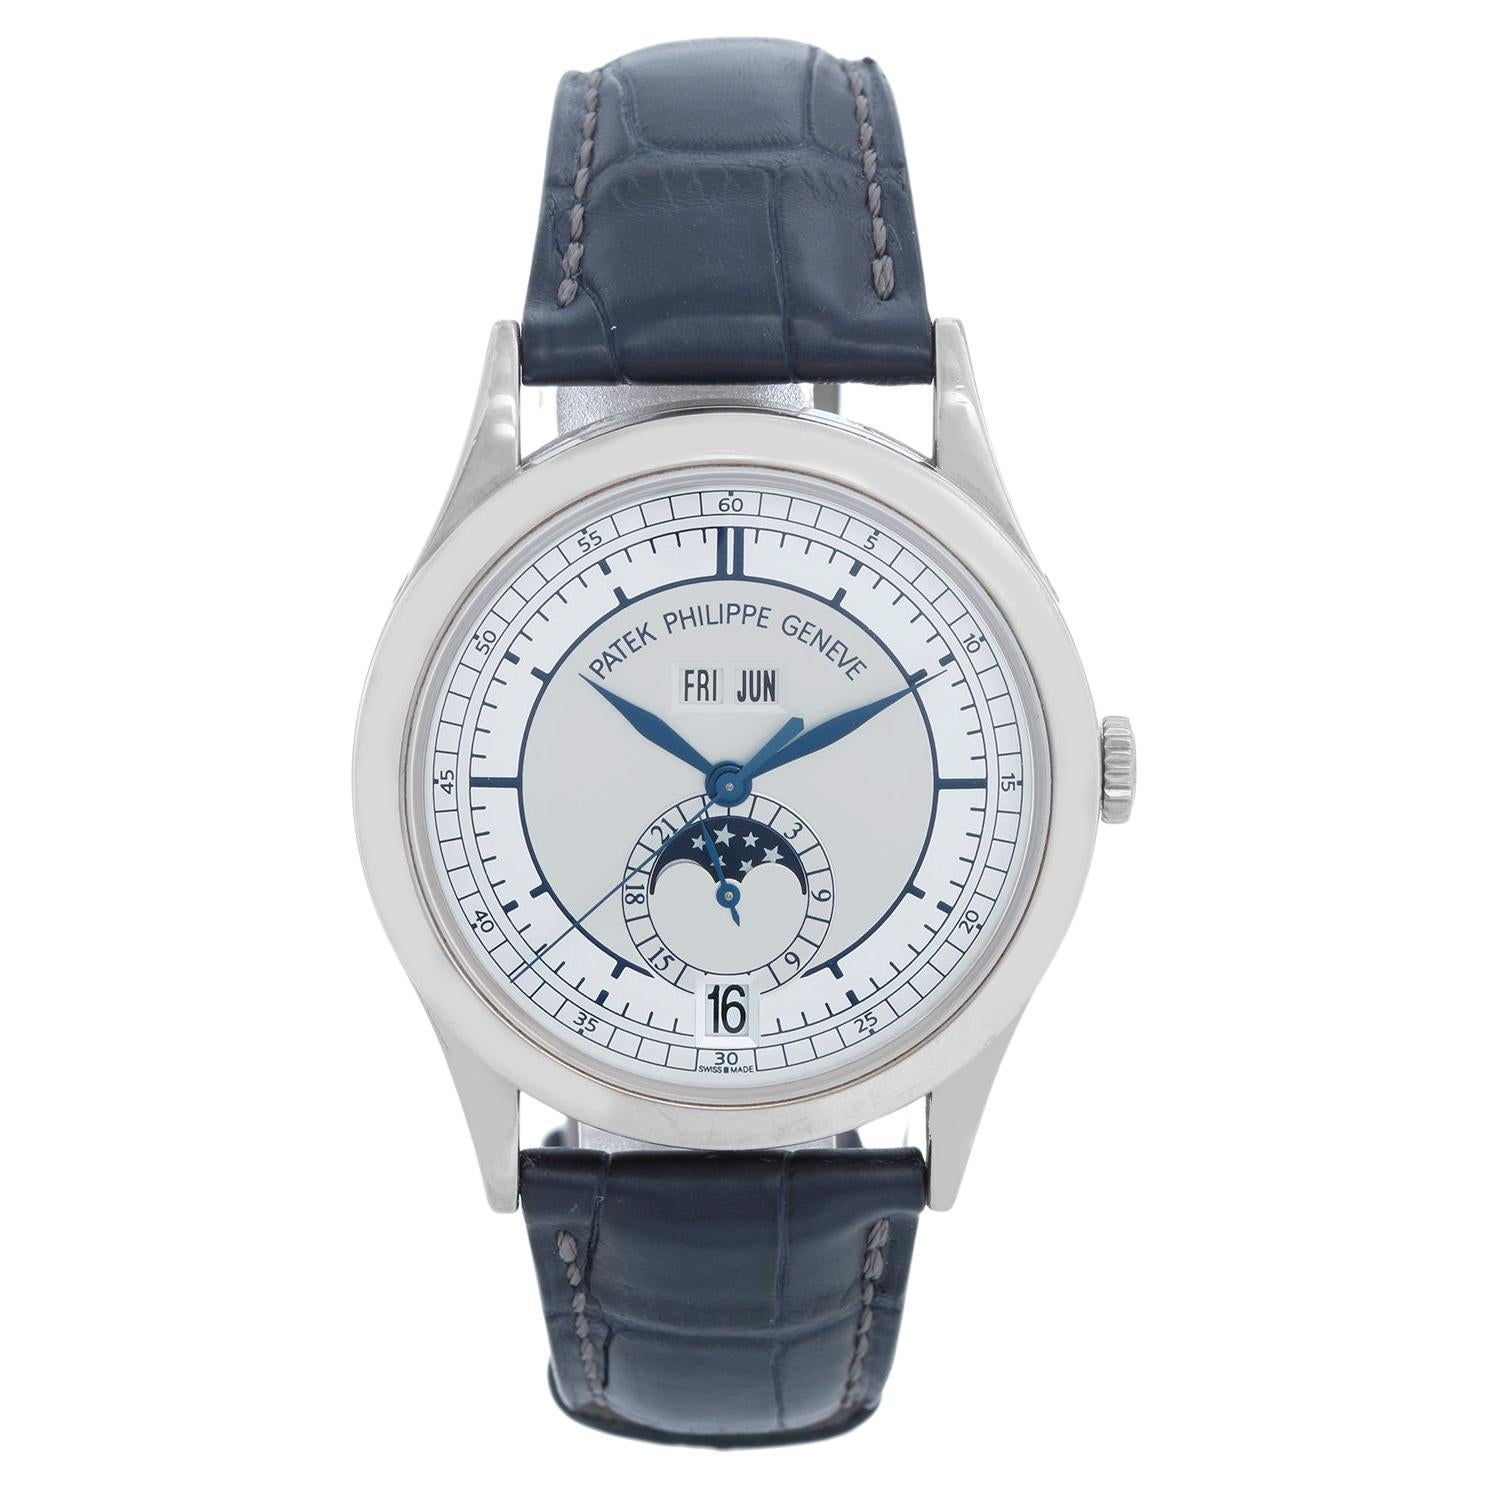 Patek Philippe Annual Calendar with Moon Phase 5396 G (or 5396G-001)